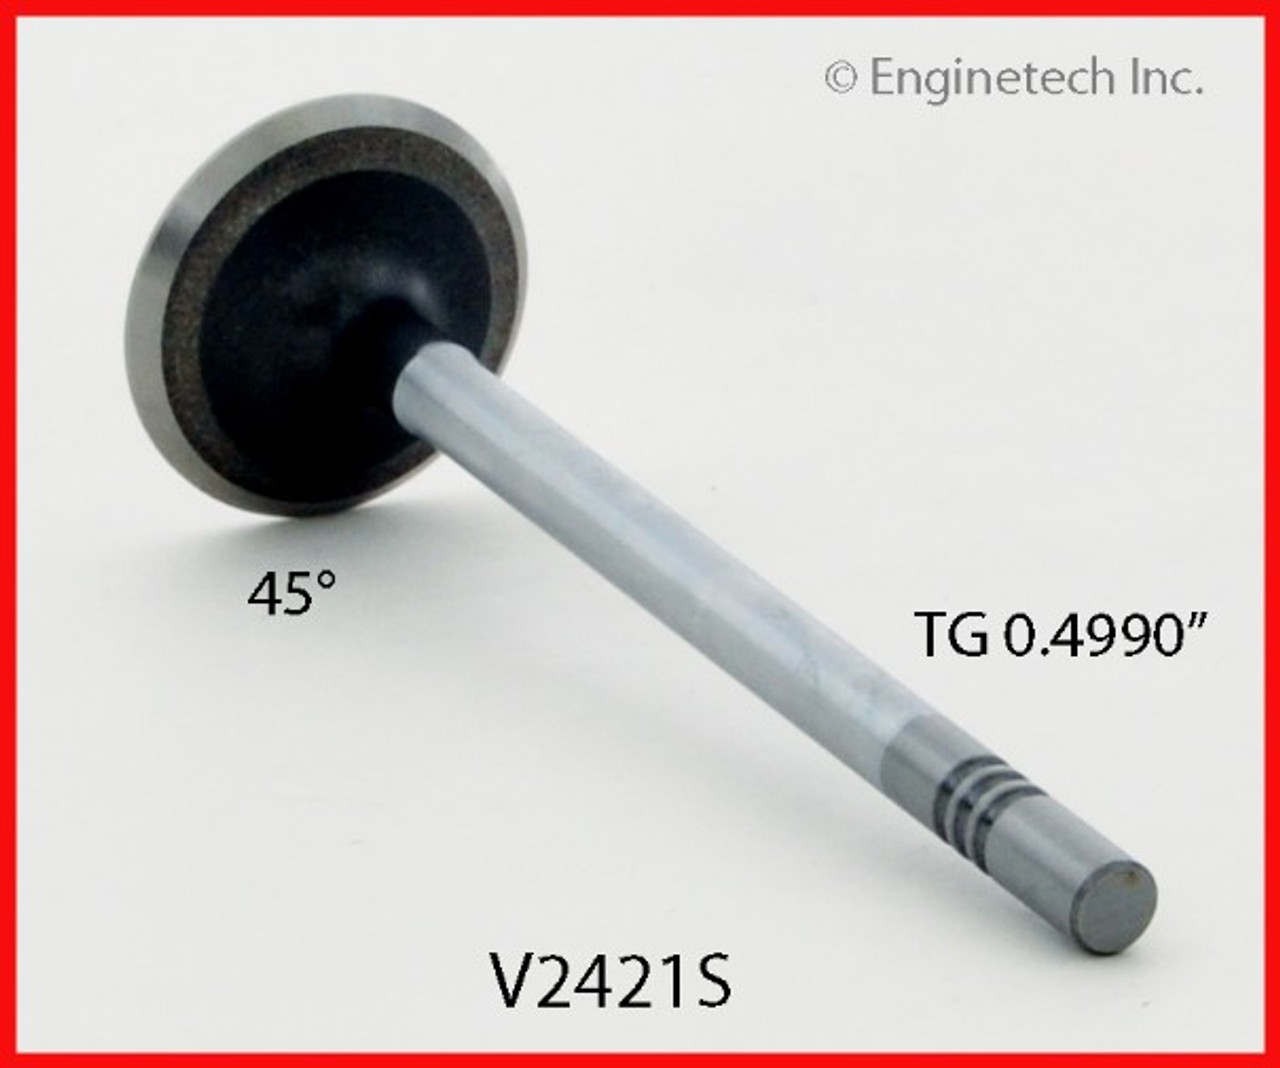 1999 Ford F-450 Super Duty 6.8L Engine Exhaust Valve V2421S -100